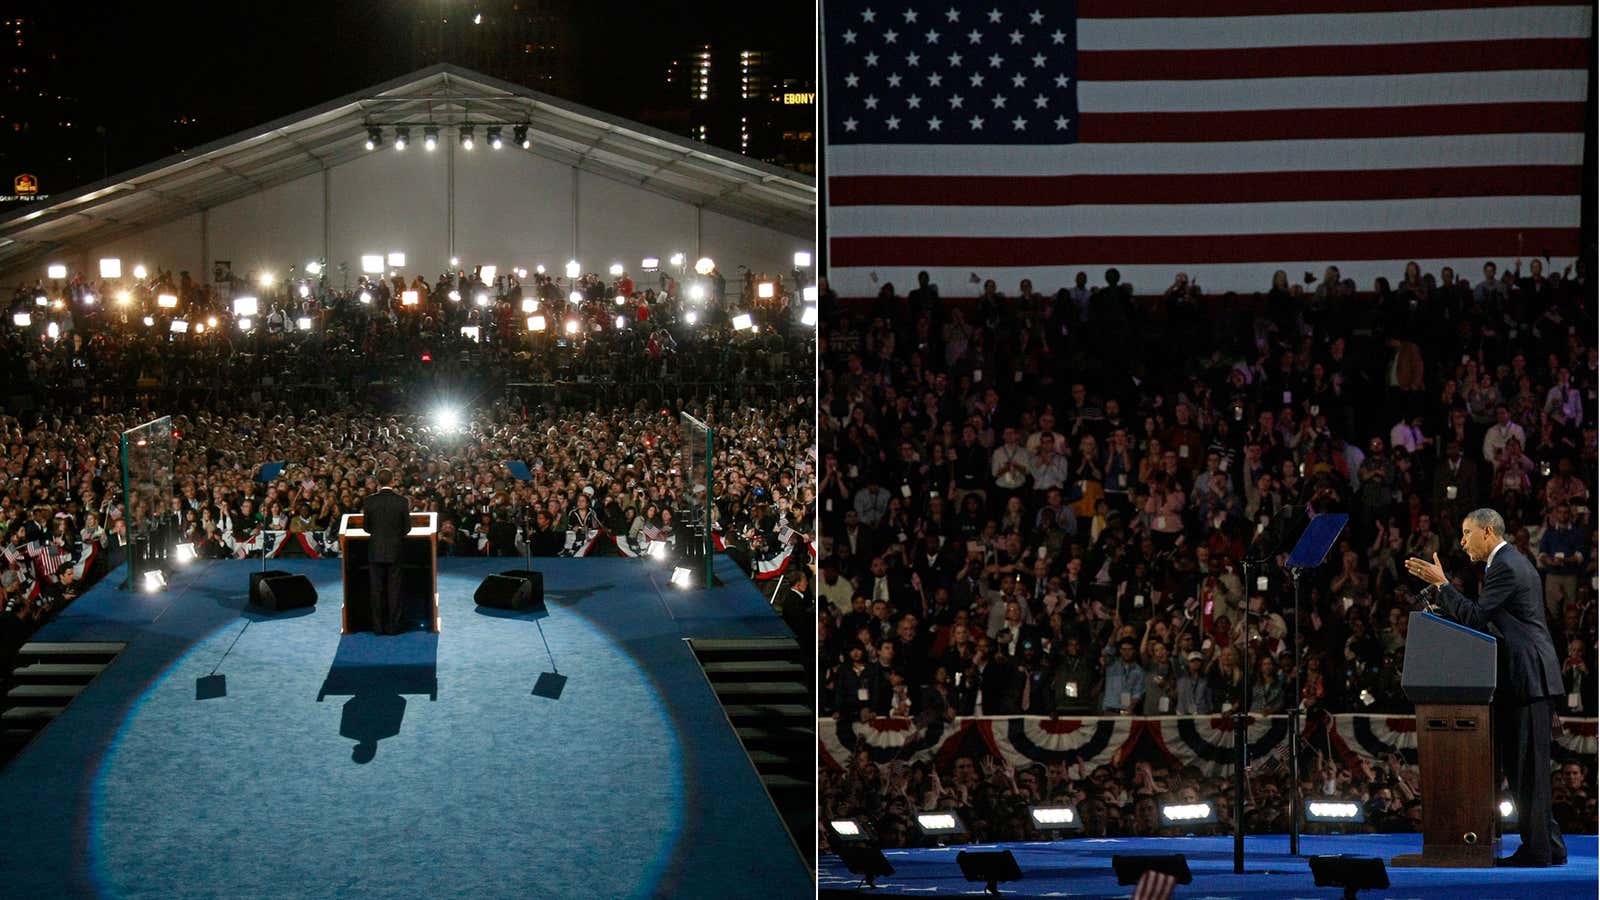 Obama giving his victory speech in 2008 and 2012